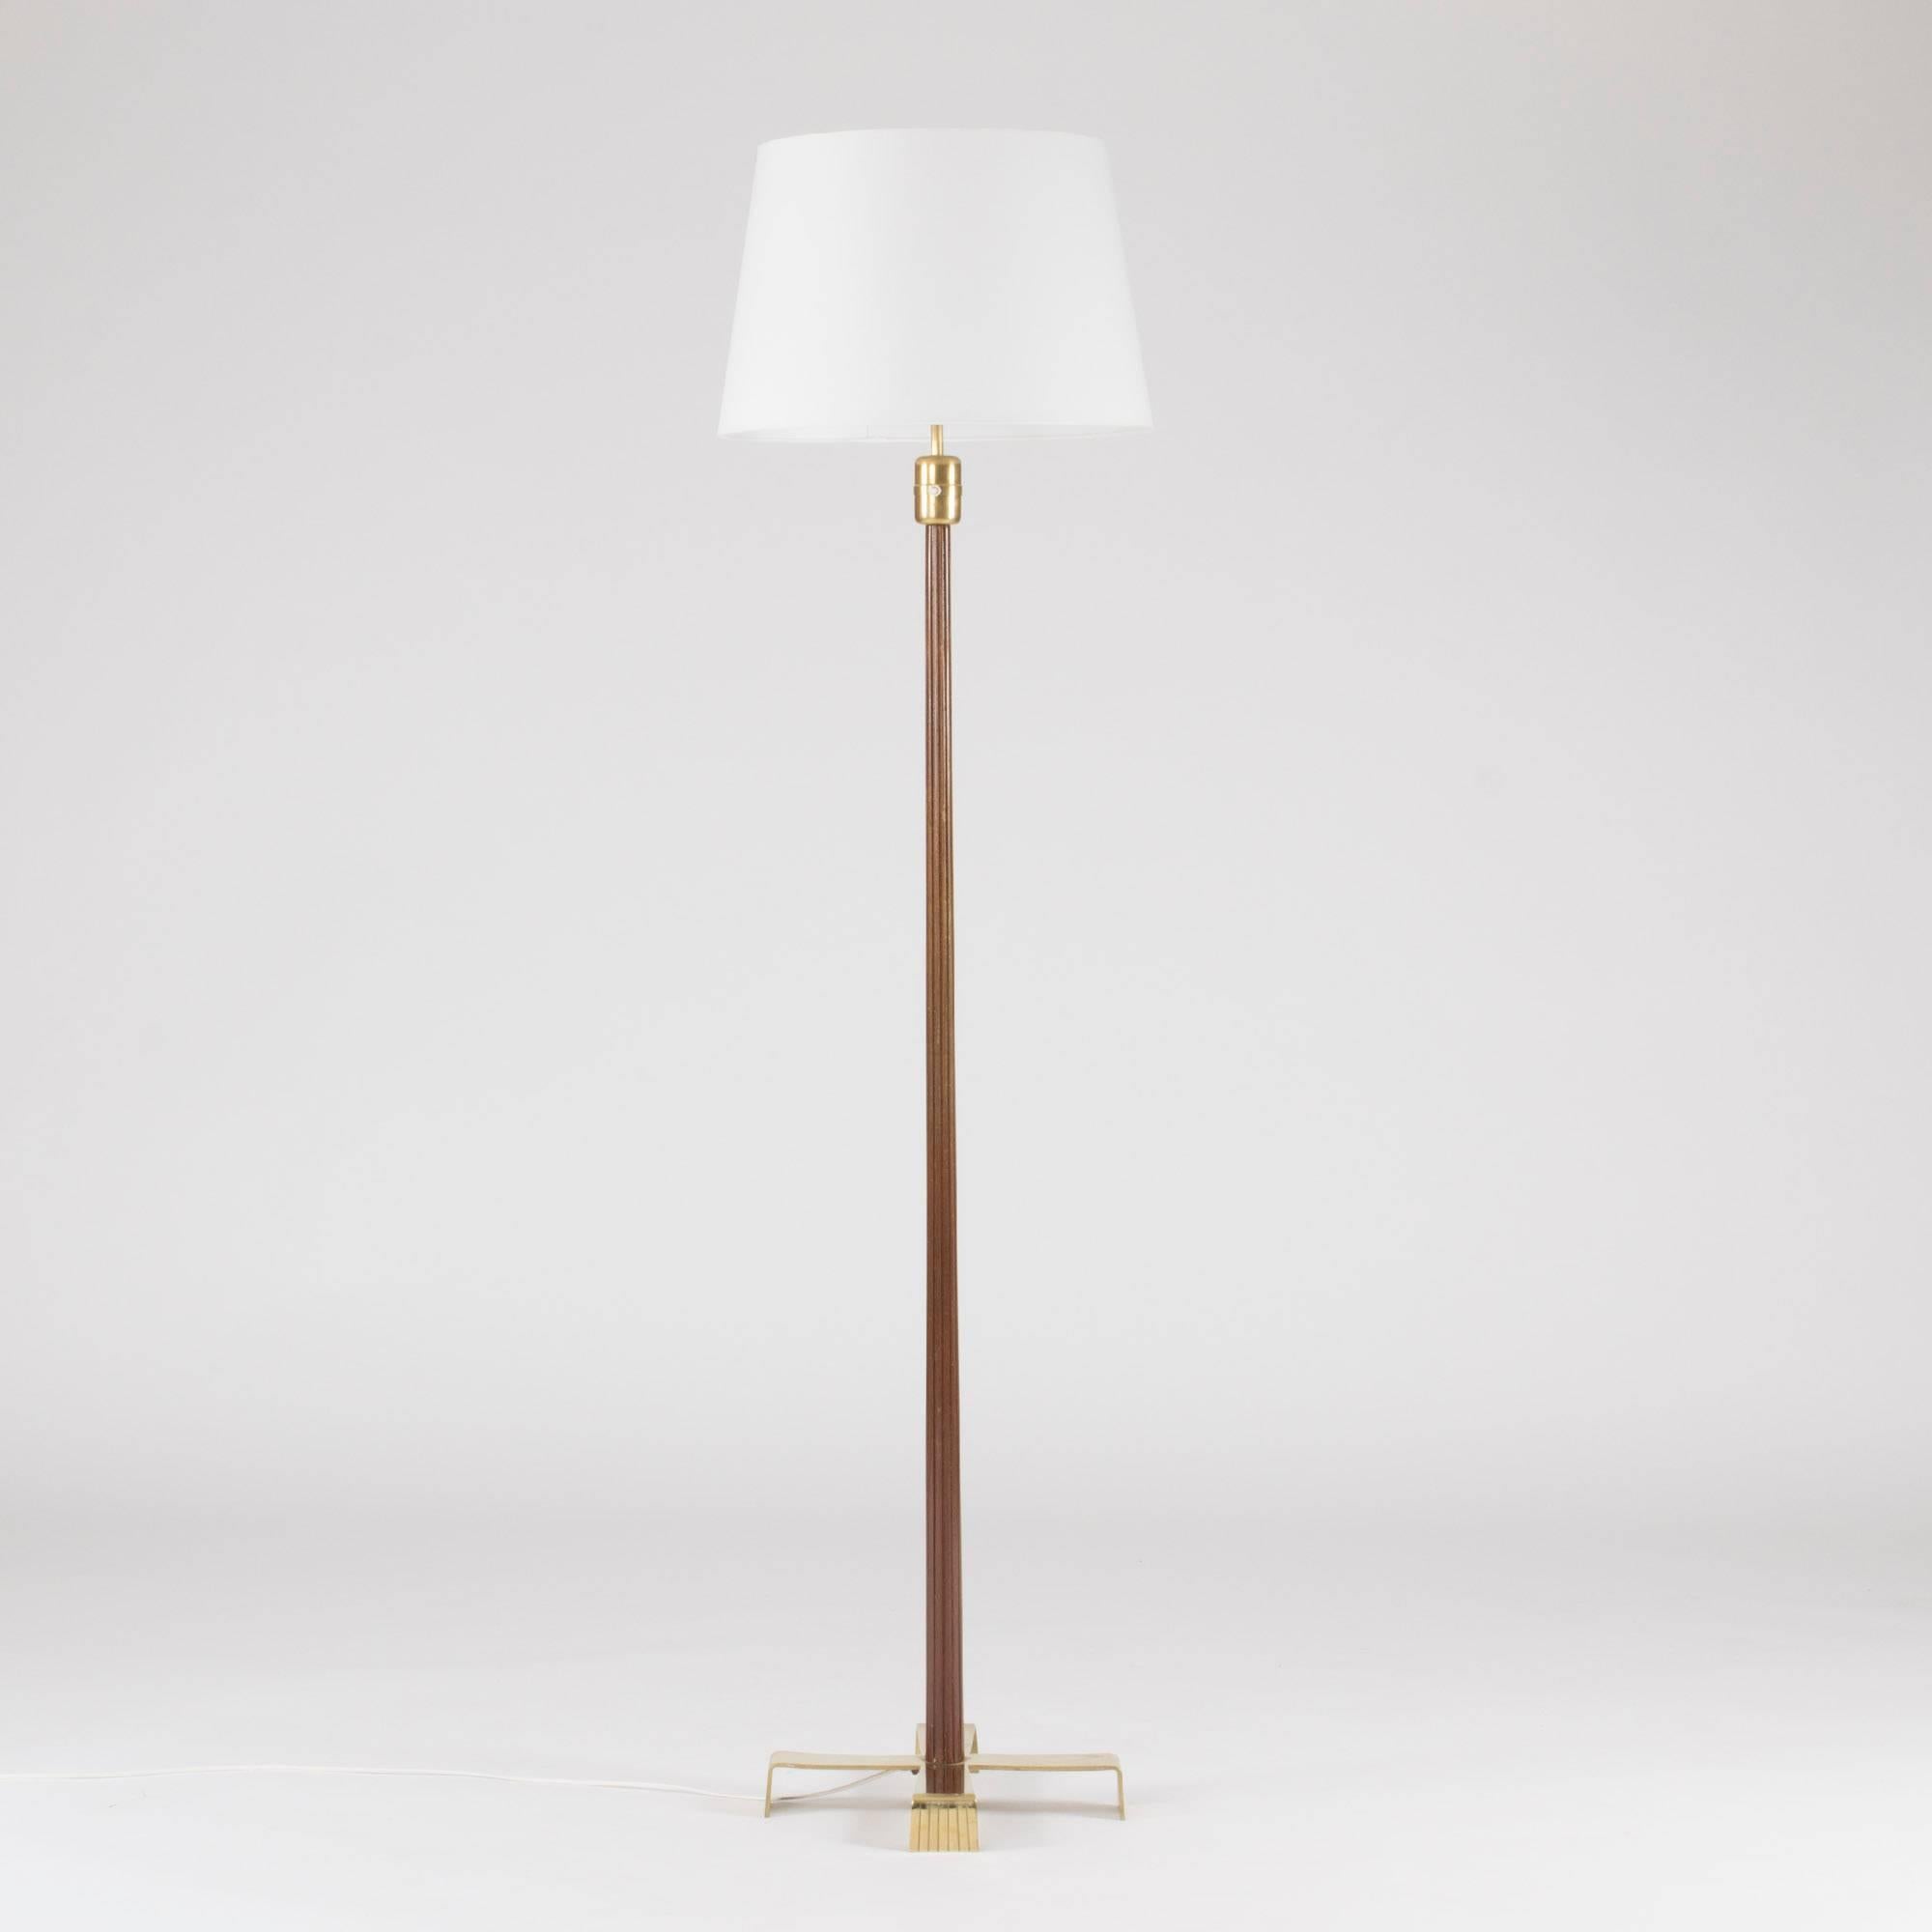 Floor lamp by Hans Bergström with a striped mahogany handle and brass base. Elegant, cross-shaped base.